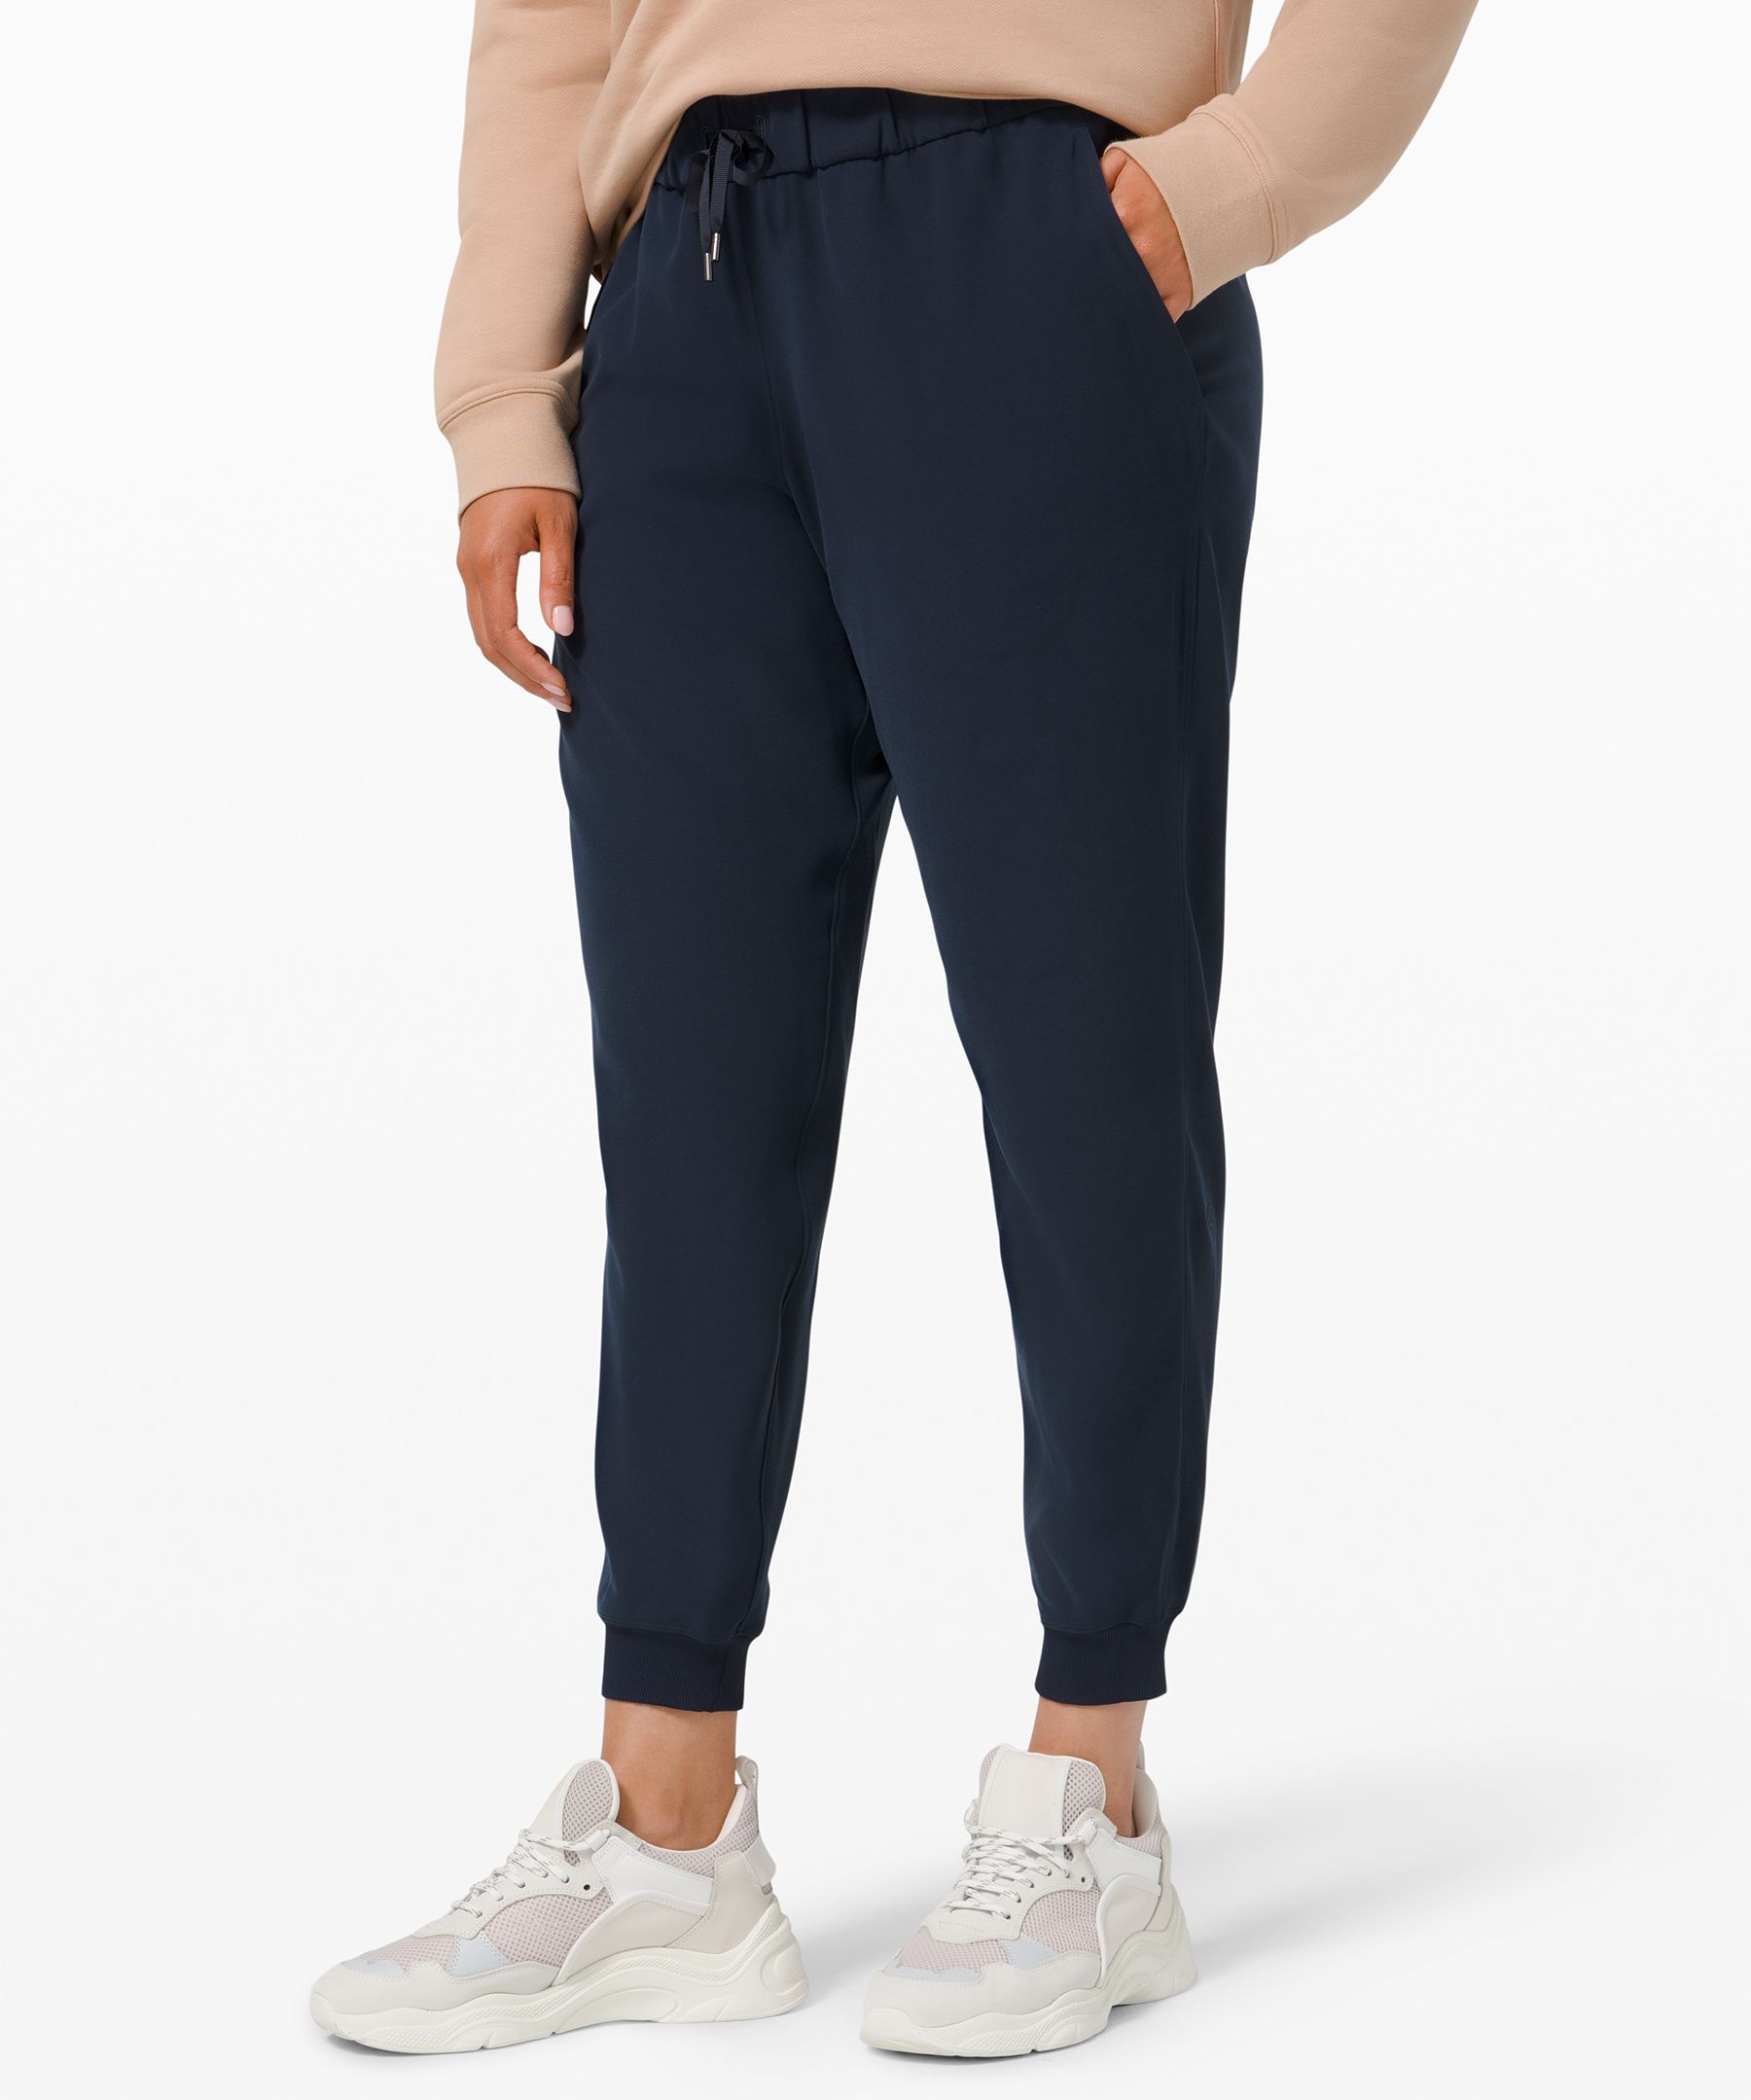 Lululemon On The Fly Jogger 28 Woven Leather International, 50% OFF